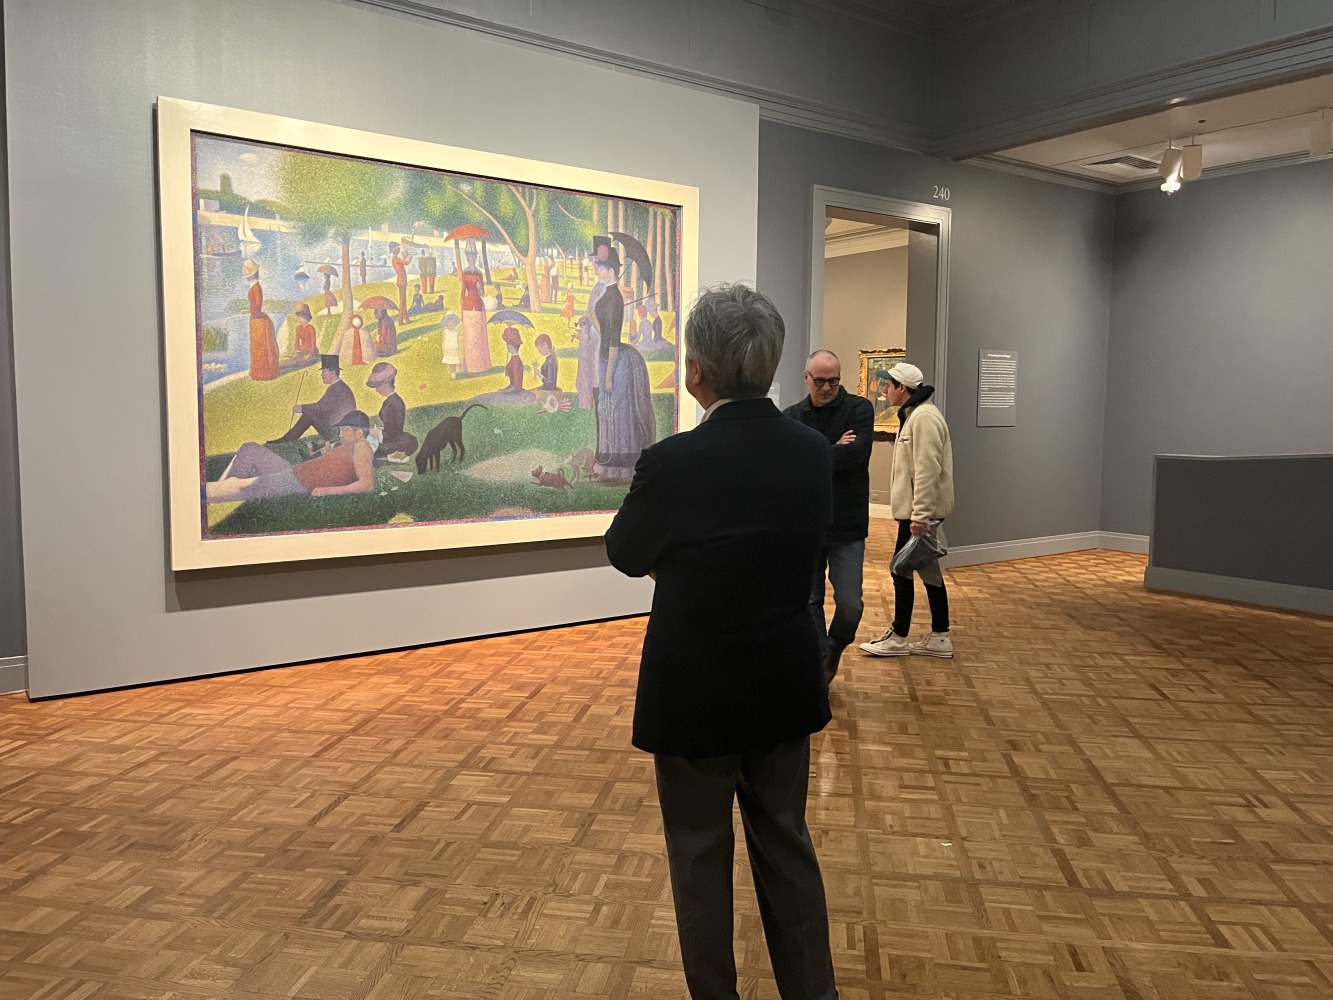 The Art Institute of Chicago is, after all, this work: Seurat&amp;rsquo;s &amp;ldquo;A Sunday afternoon on the island of La Grande Jatte&amp;rdquo;. &amp;nbsp; it is not allowed to leave the museum.&amp;nbsp; It is known for its&amp;rsquo; pointillism. &amp;nbsp;But if you look at it closely, you can see uses of elongated lines to express the texture.